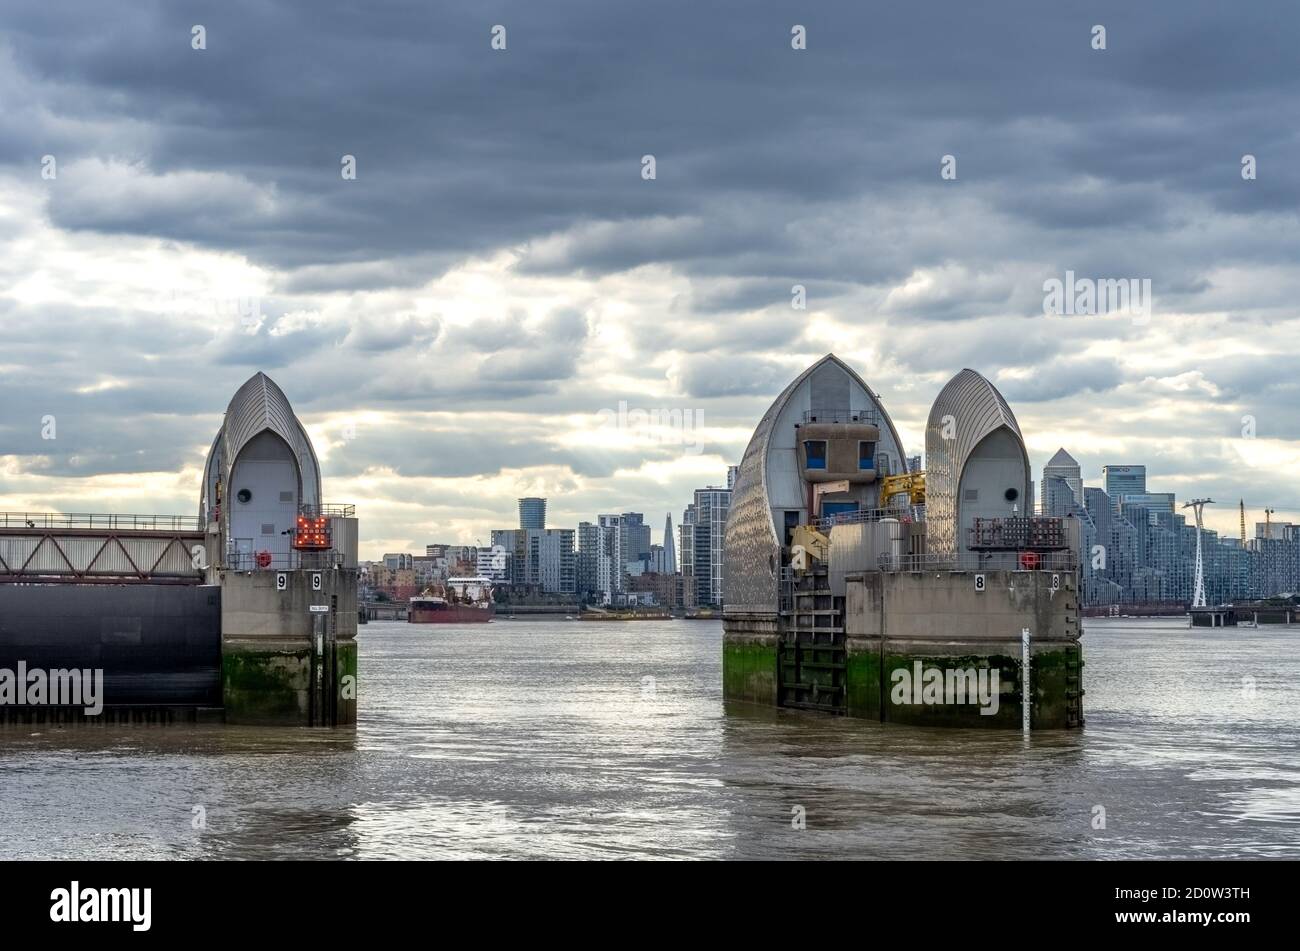 Thames Barrier on the River Thames against the Canary Wharf skyline, London Stock Photo